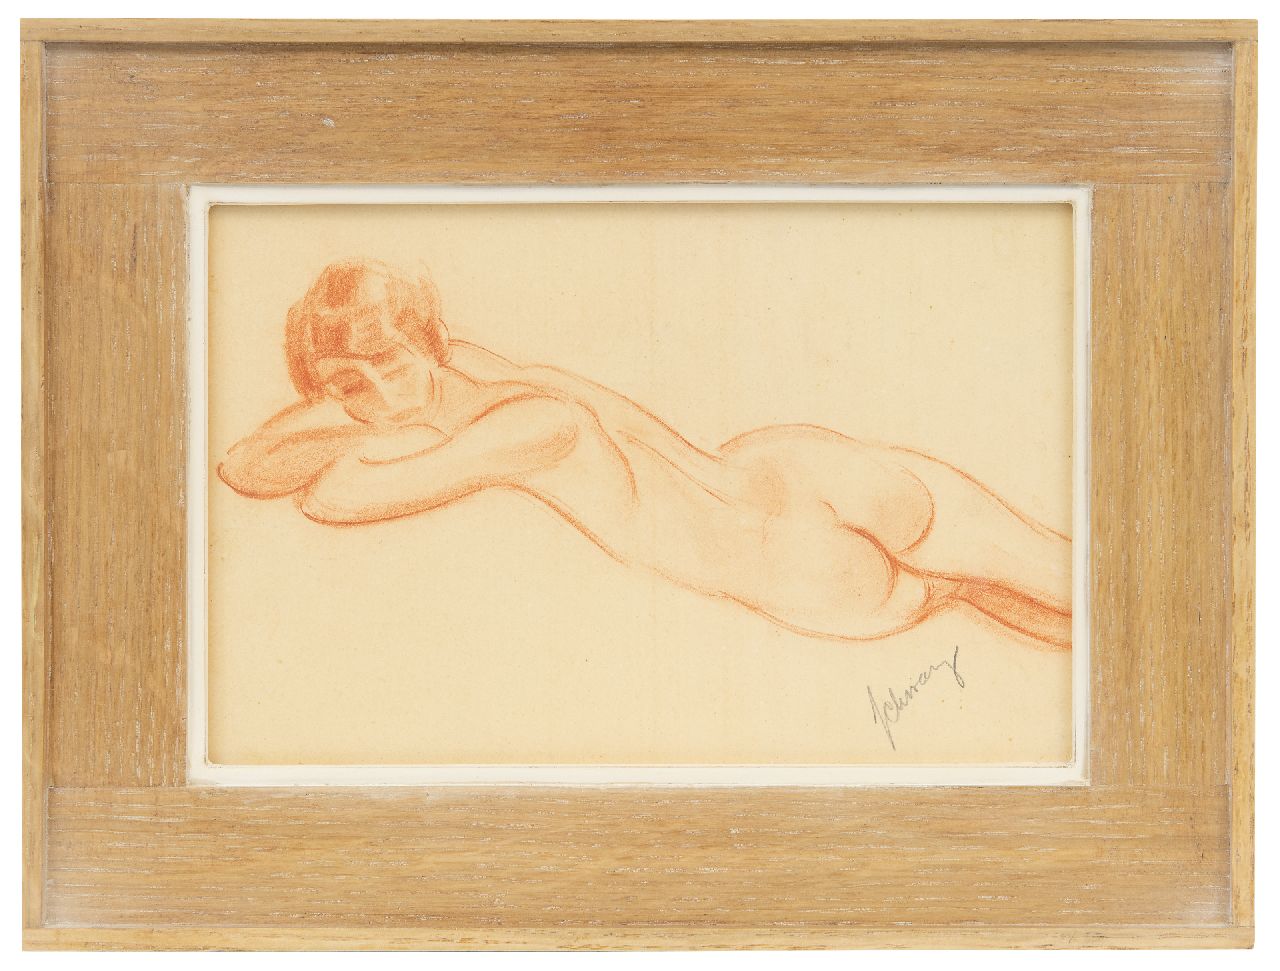 Schwarz S.  | Samuel 'Mommie' Schwarz | Watercolours and drawings offered for sale | Reclining nude, red chalk on paper 17.8 x 25.3 cm, signed l.r.